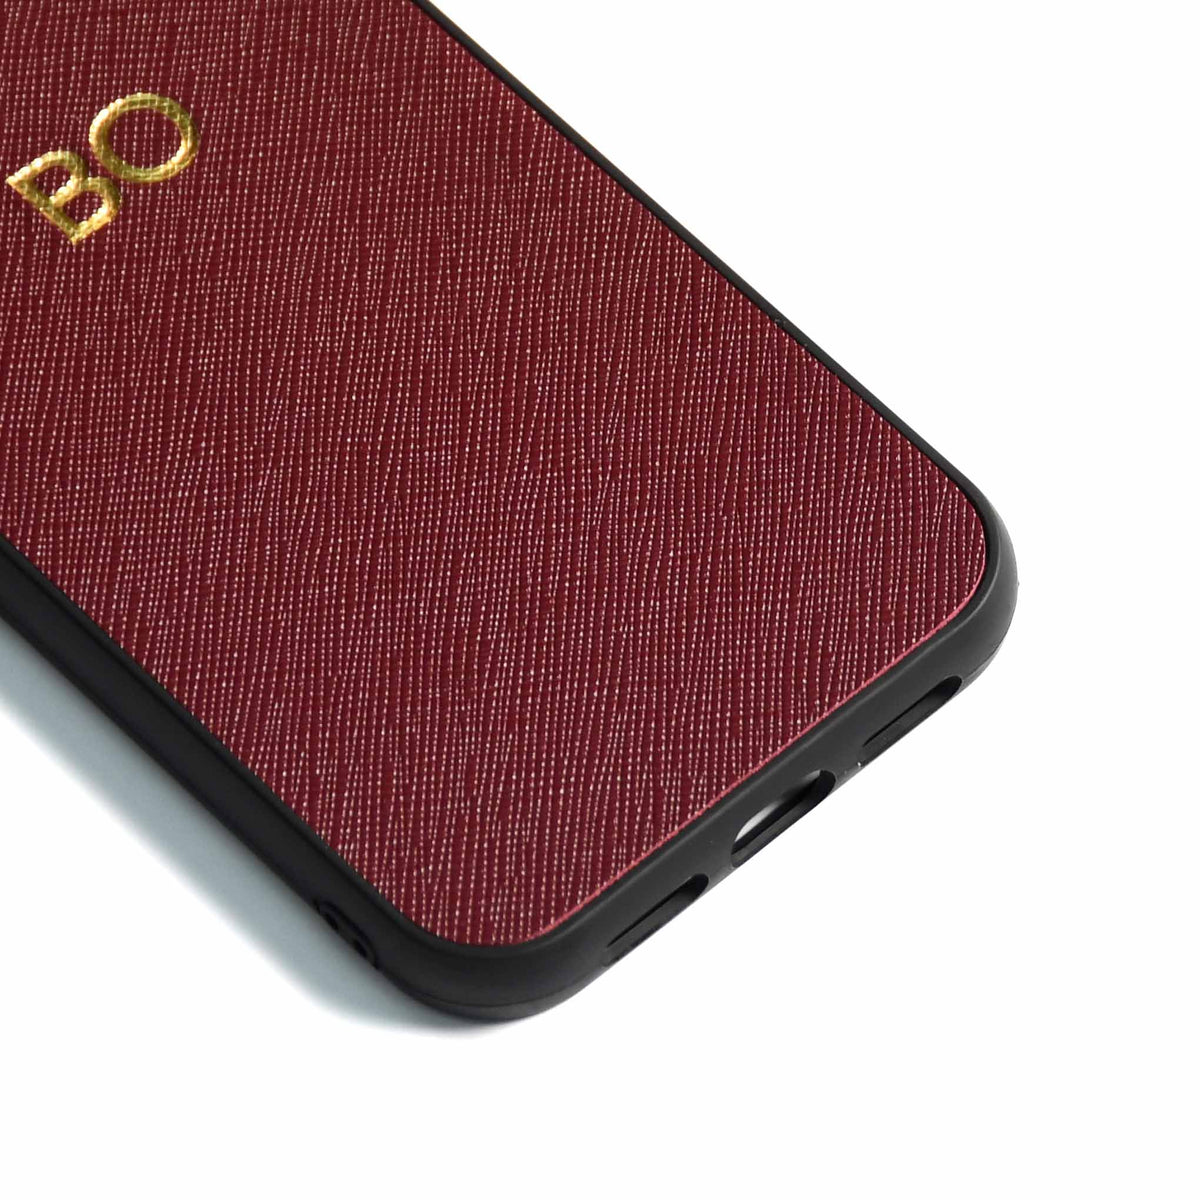 Samsung S21 - Burgundy - Personalizable